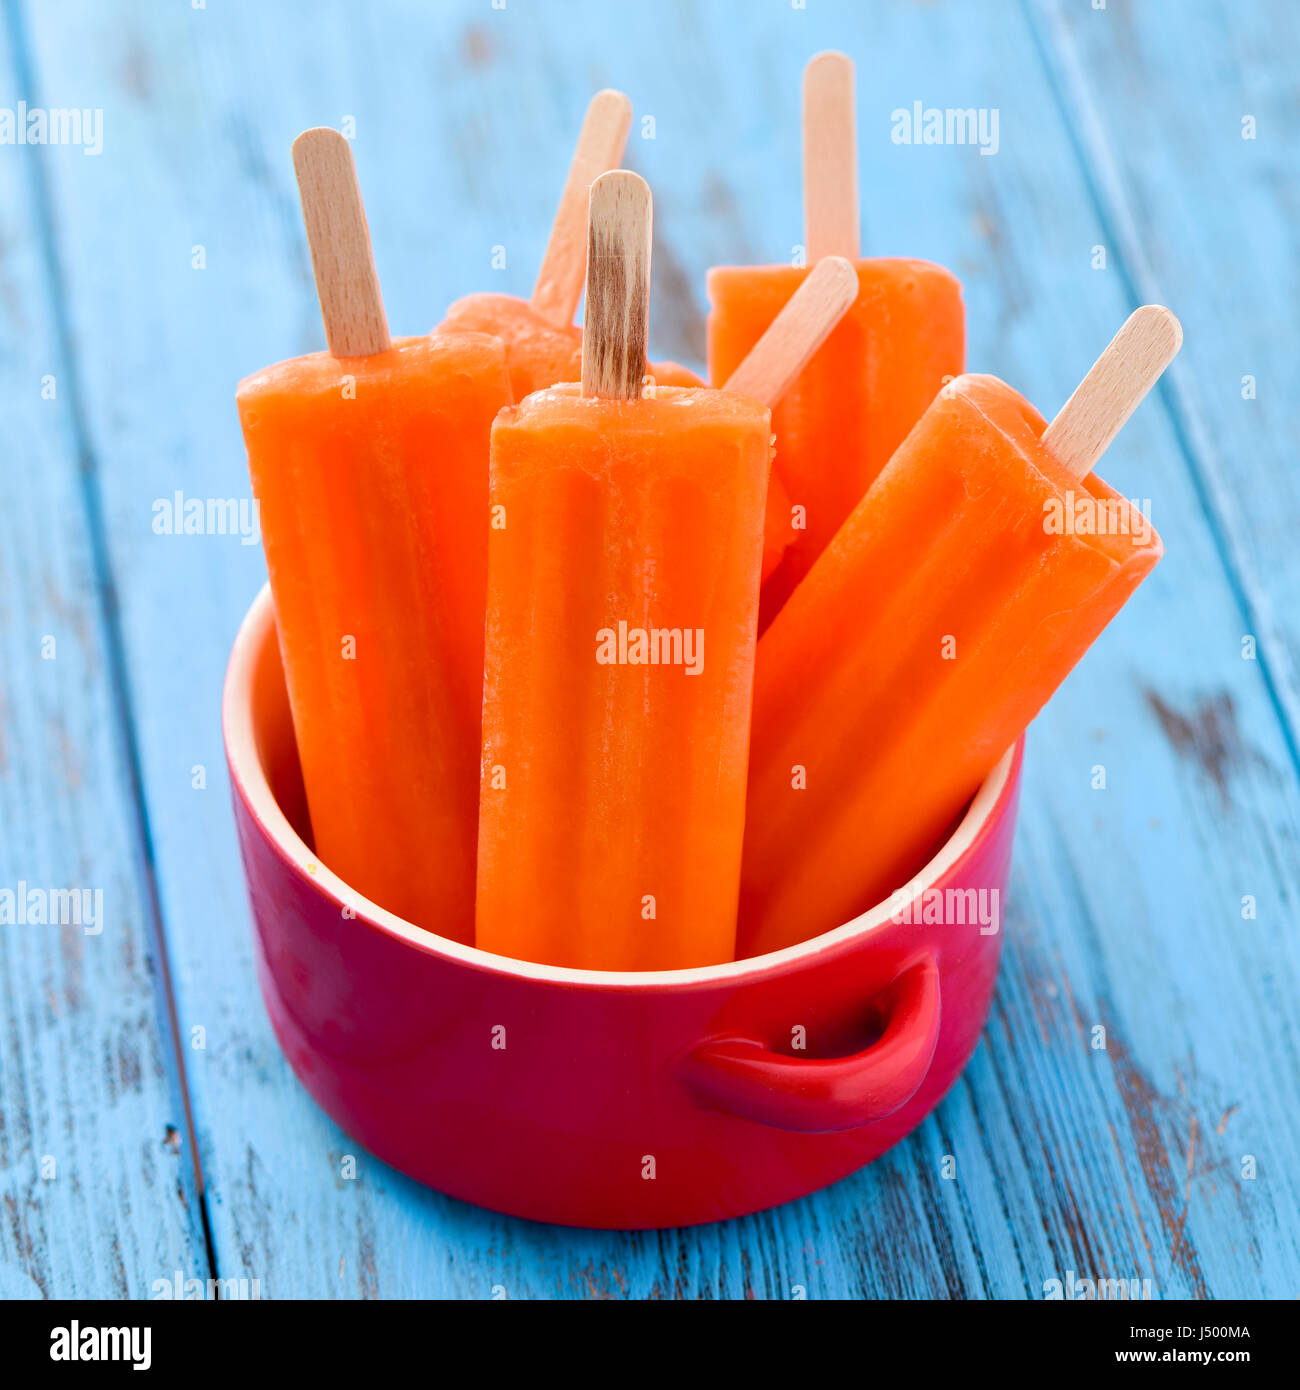 some refreshing orange flavored ice pops in a red ceramic bowl, on a blue rustic wooden table Stock Photo